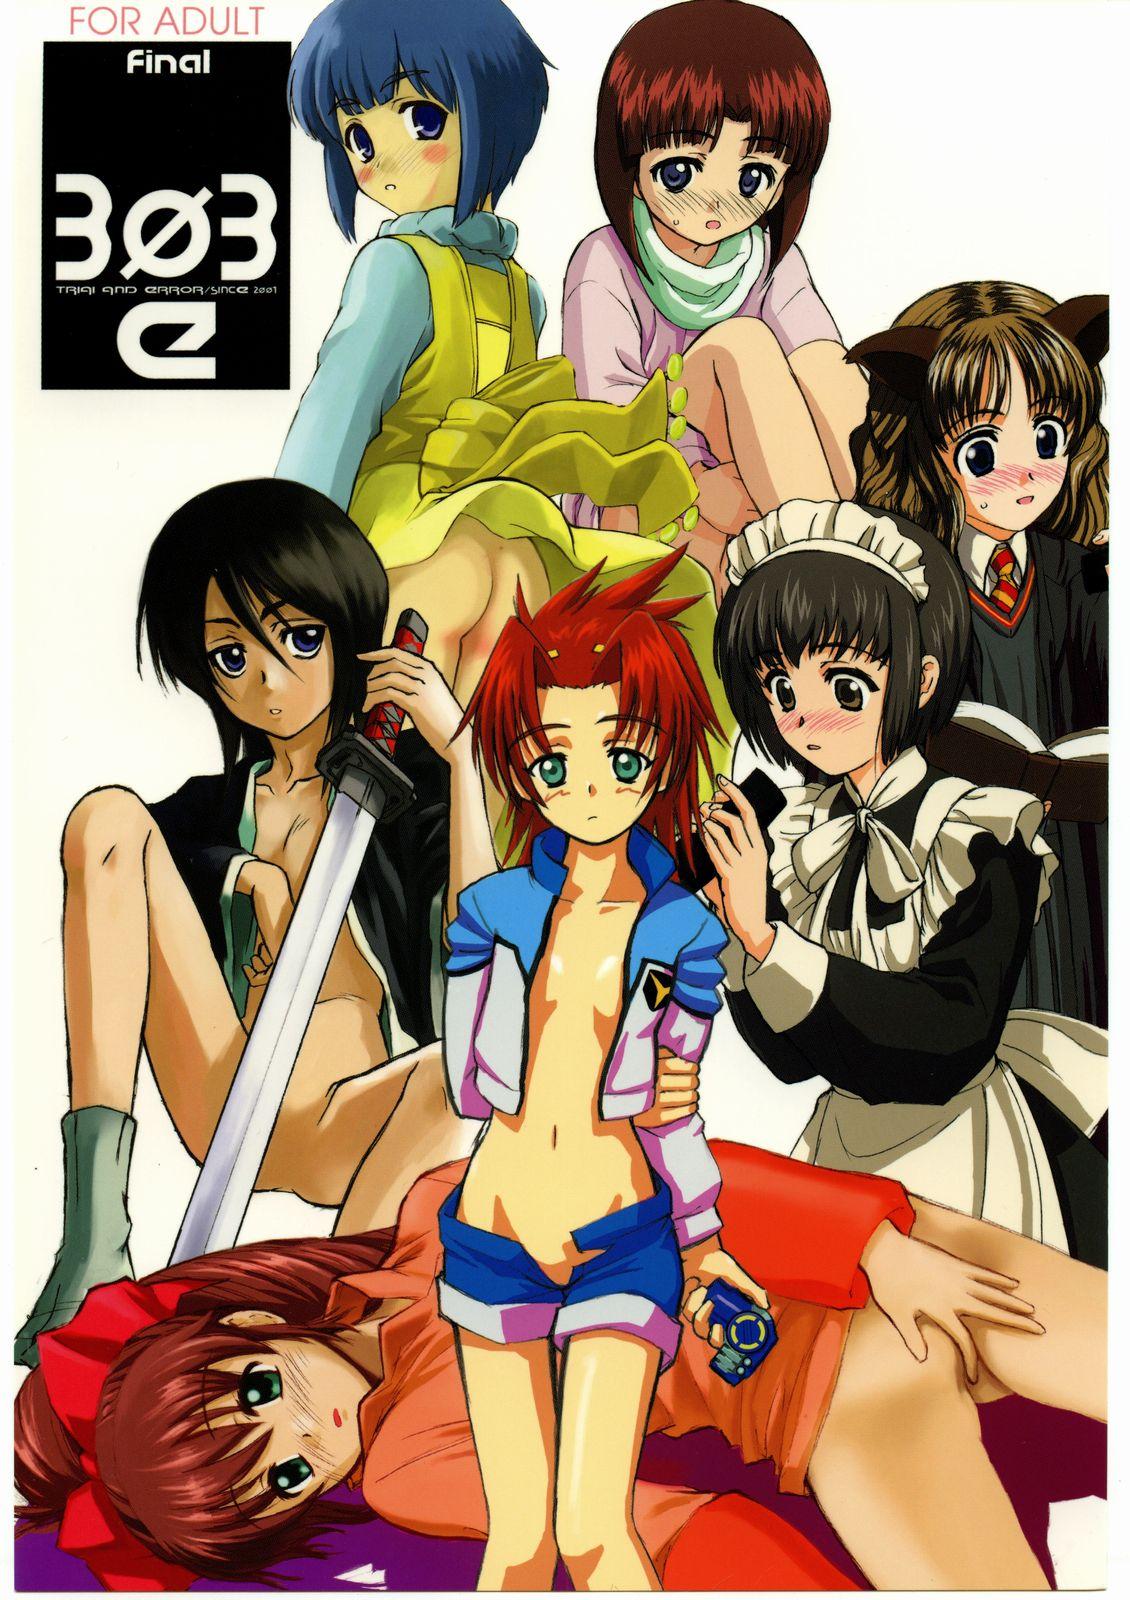 Sixtynine 303e Final - Bleach Harry potter Gear fighter dendoh Fruits basket Overman king gainer S cry ed Gundam x Tiny Titties - Picture 1